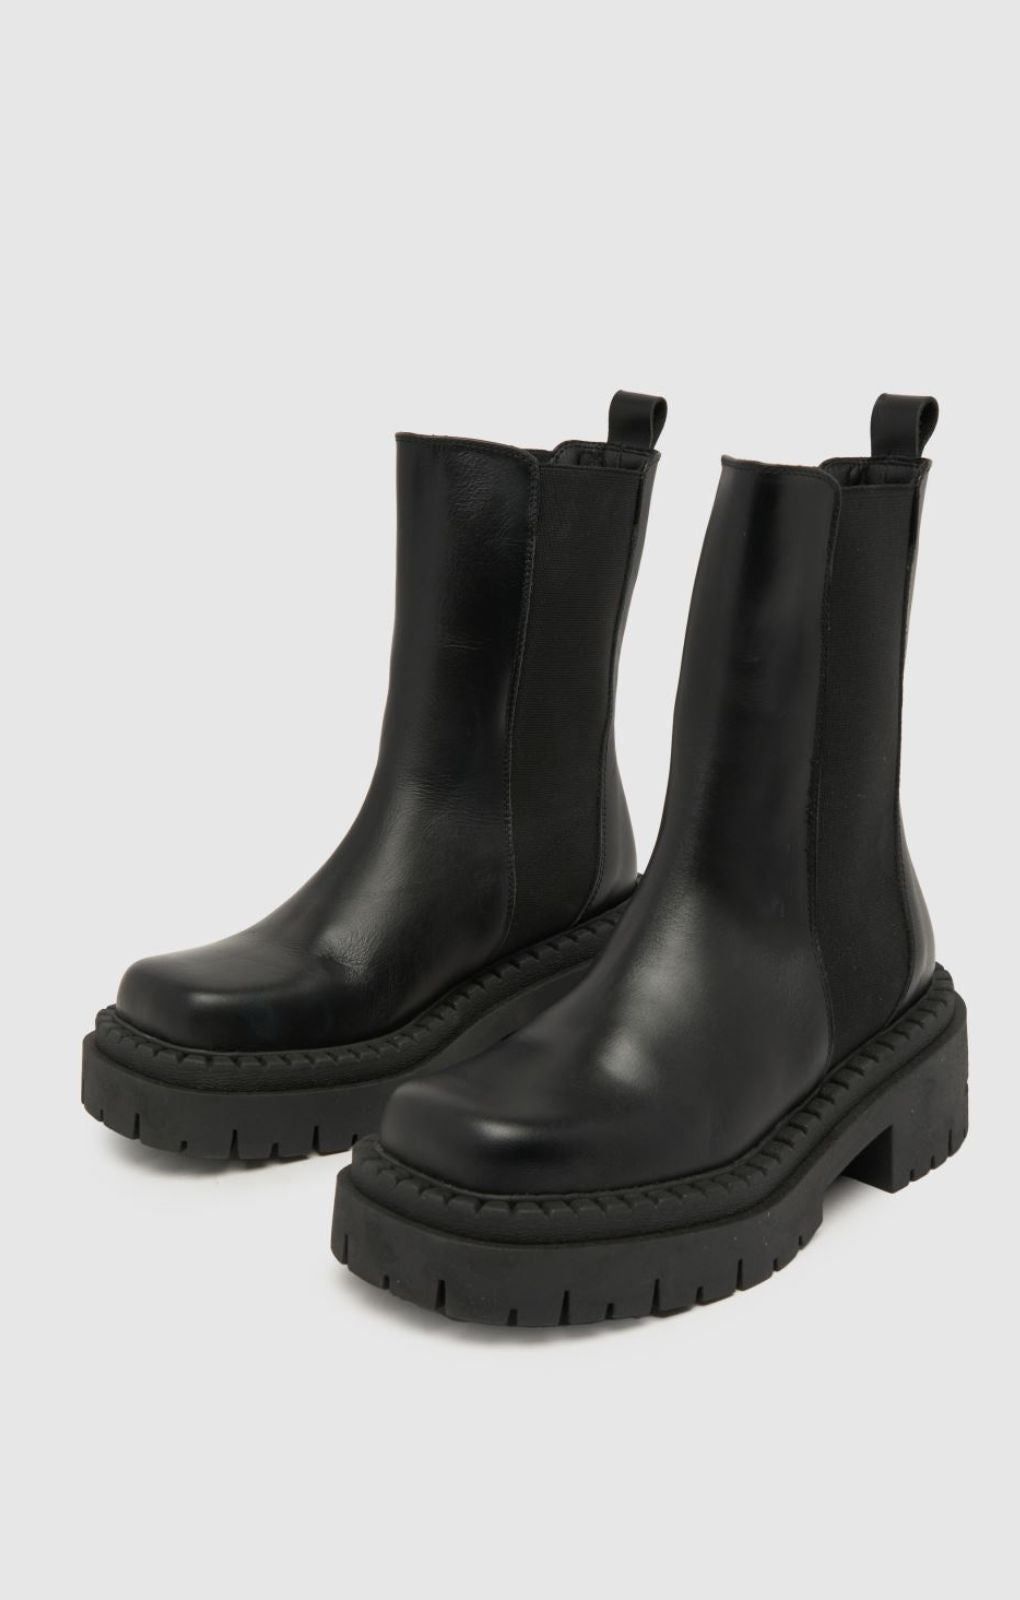 Schuh Andrea Leather Chunky Chelsea Boots in Black product image